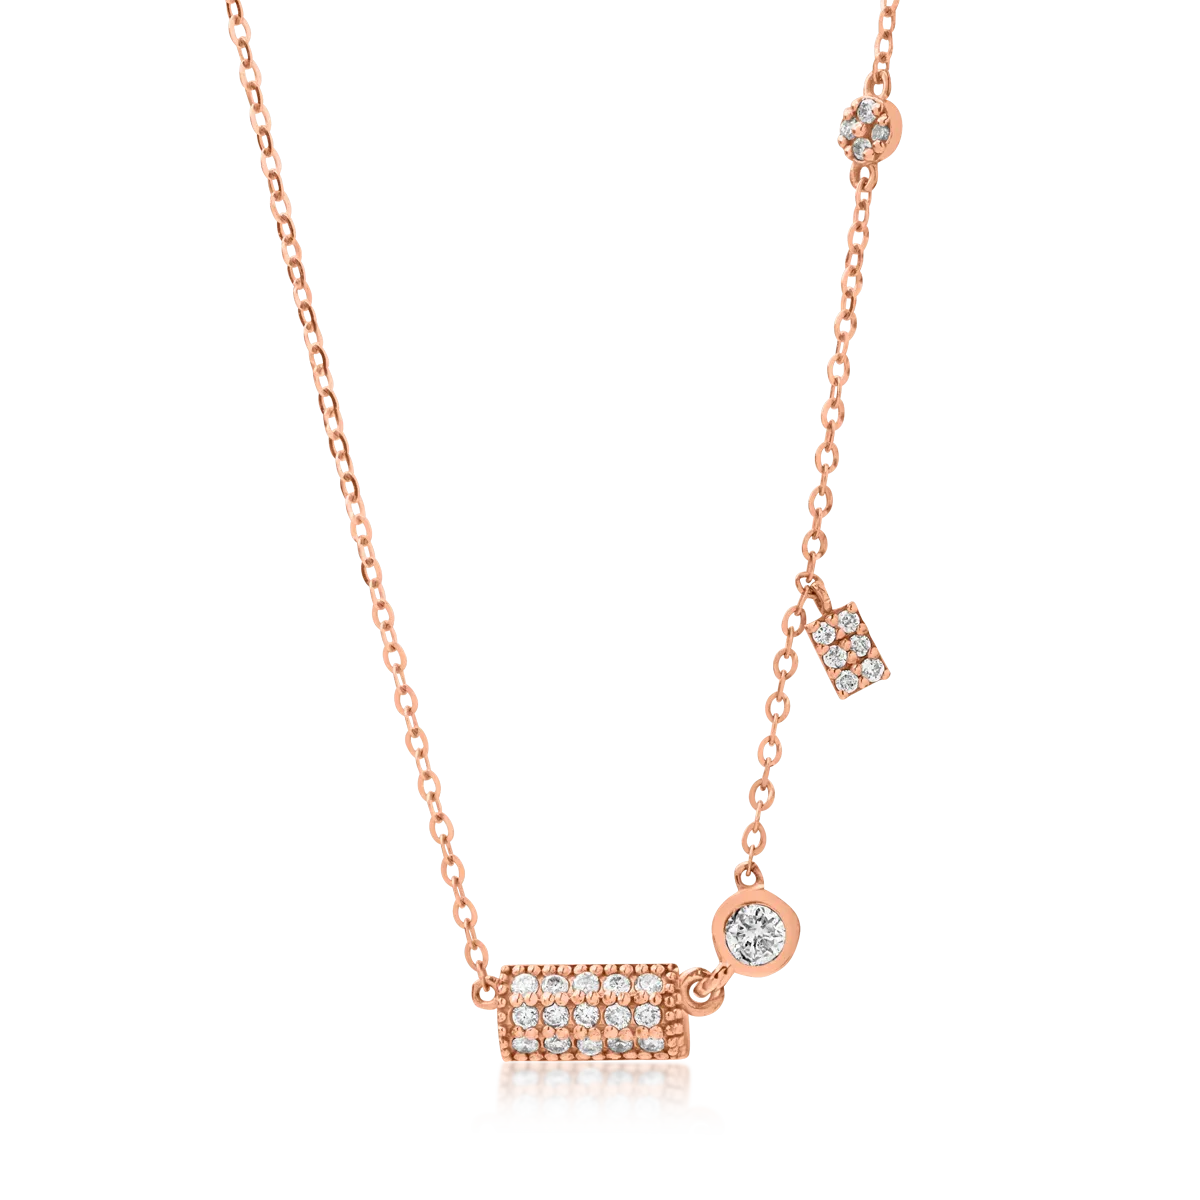 18K rose gold pendant necklace with 0.275ct diamonds